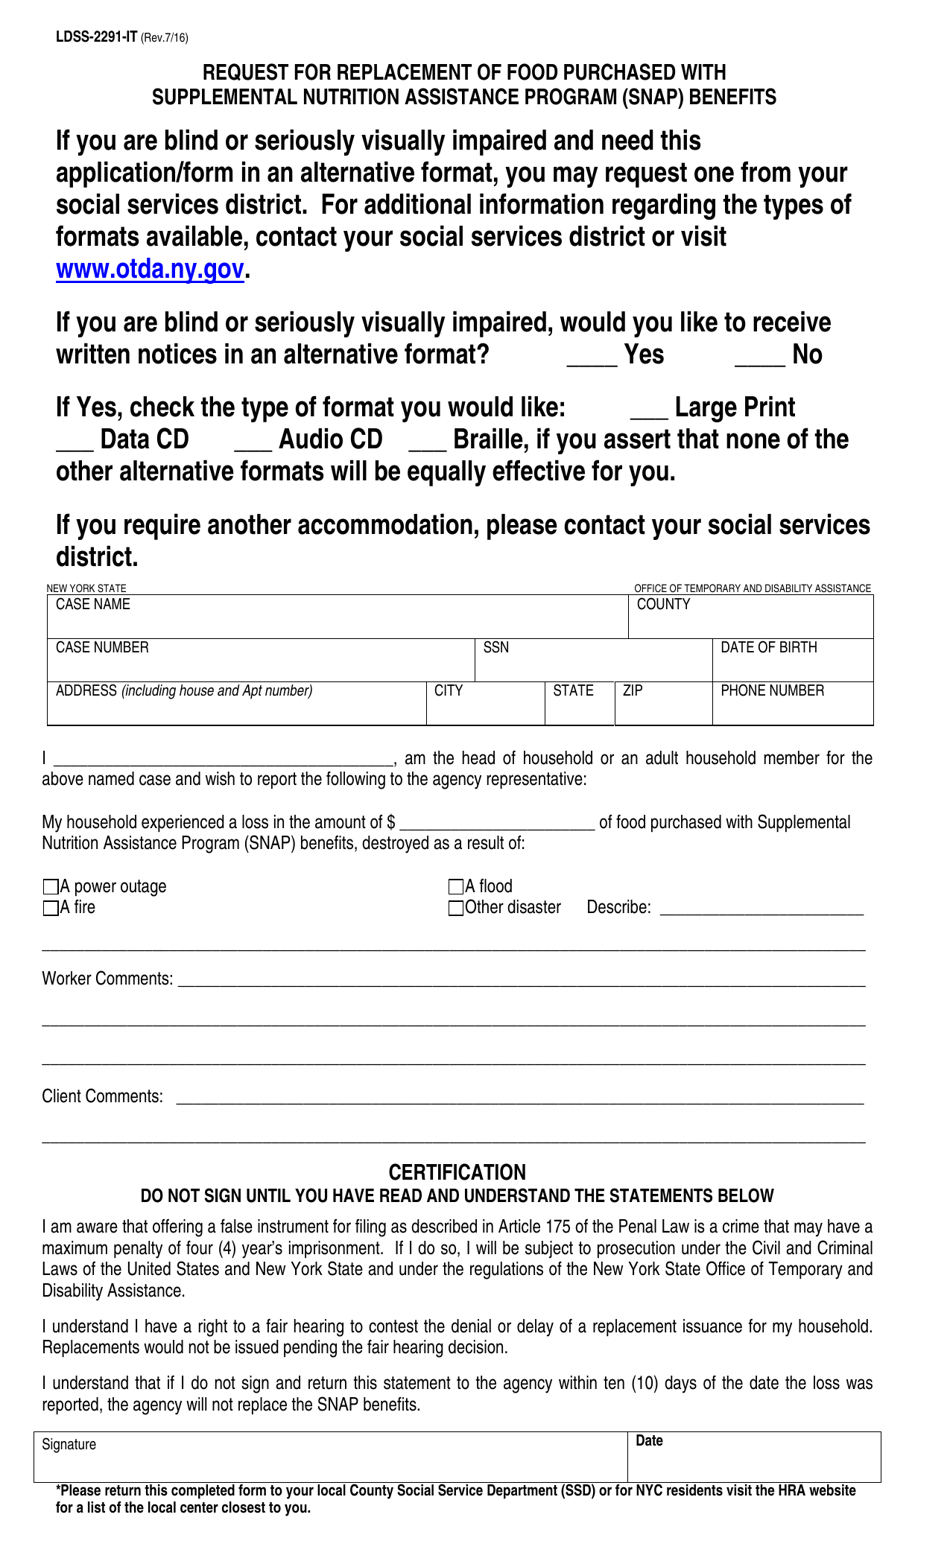 Form LDSS-2291 Request for Replacement of Food Purchased With Supplemental Nutrition Assistance Program (Snap) Benefits - New York (English / Italian), Page 1